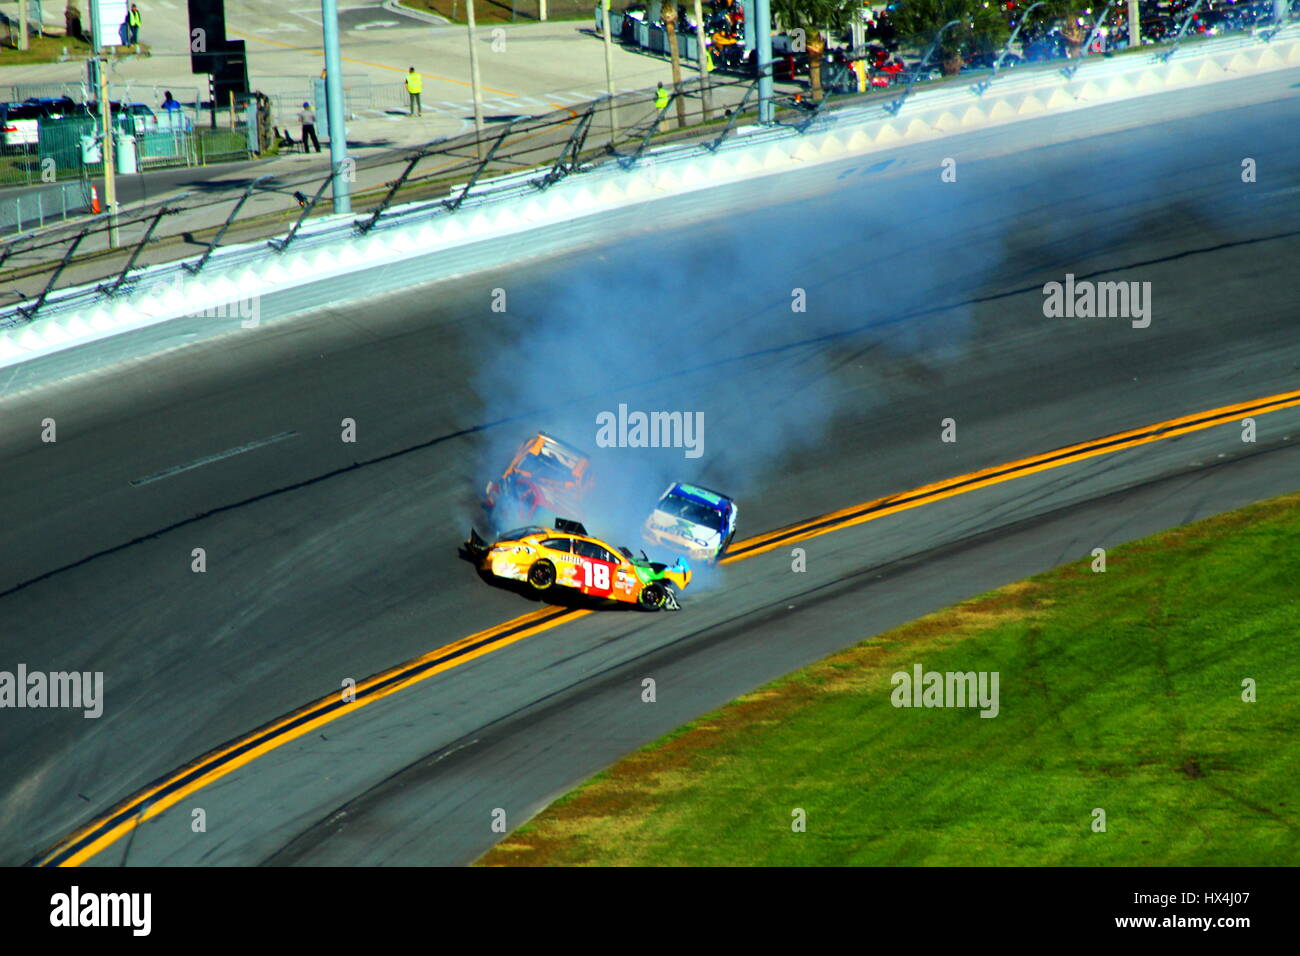 Kyle Busch collects three other drivers in a wreck off of turn 4 at Daytona International Speedway during the 2017 Daytona 500. Stock Photo